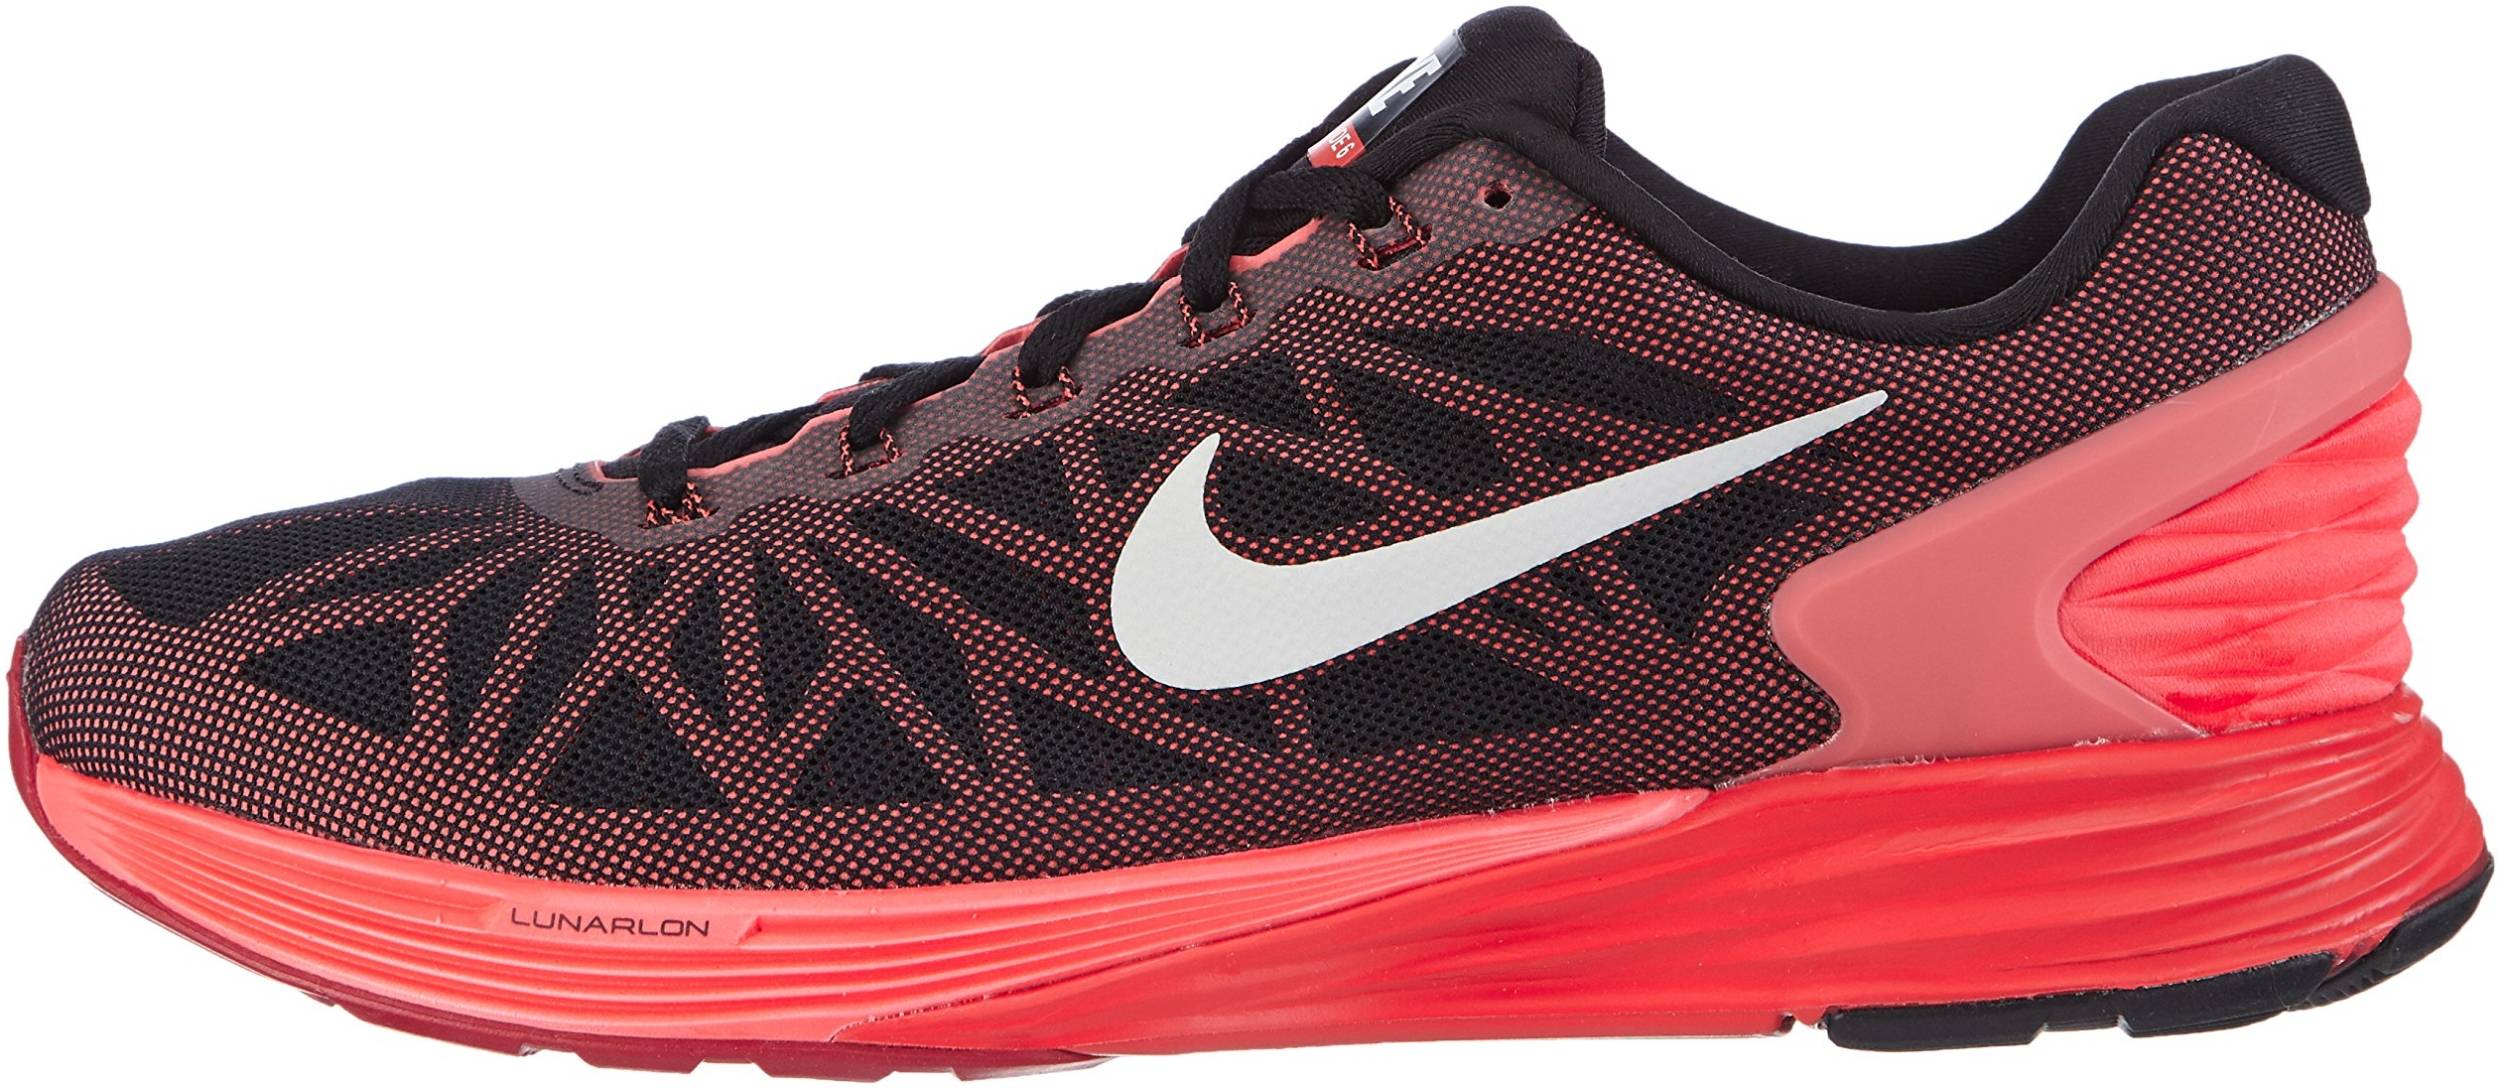 Nike 6 Review, Facts, Comparison | RunRepeat